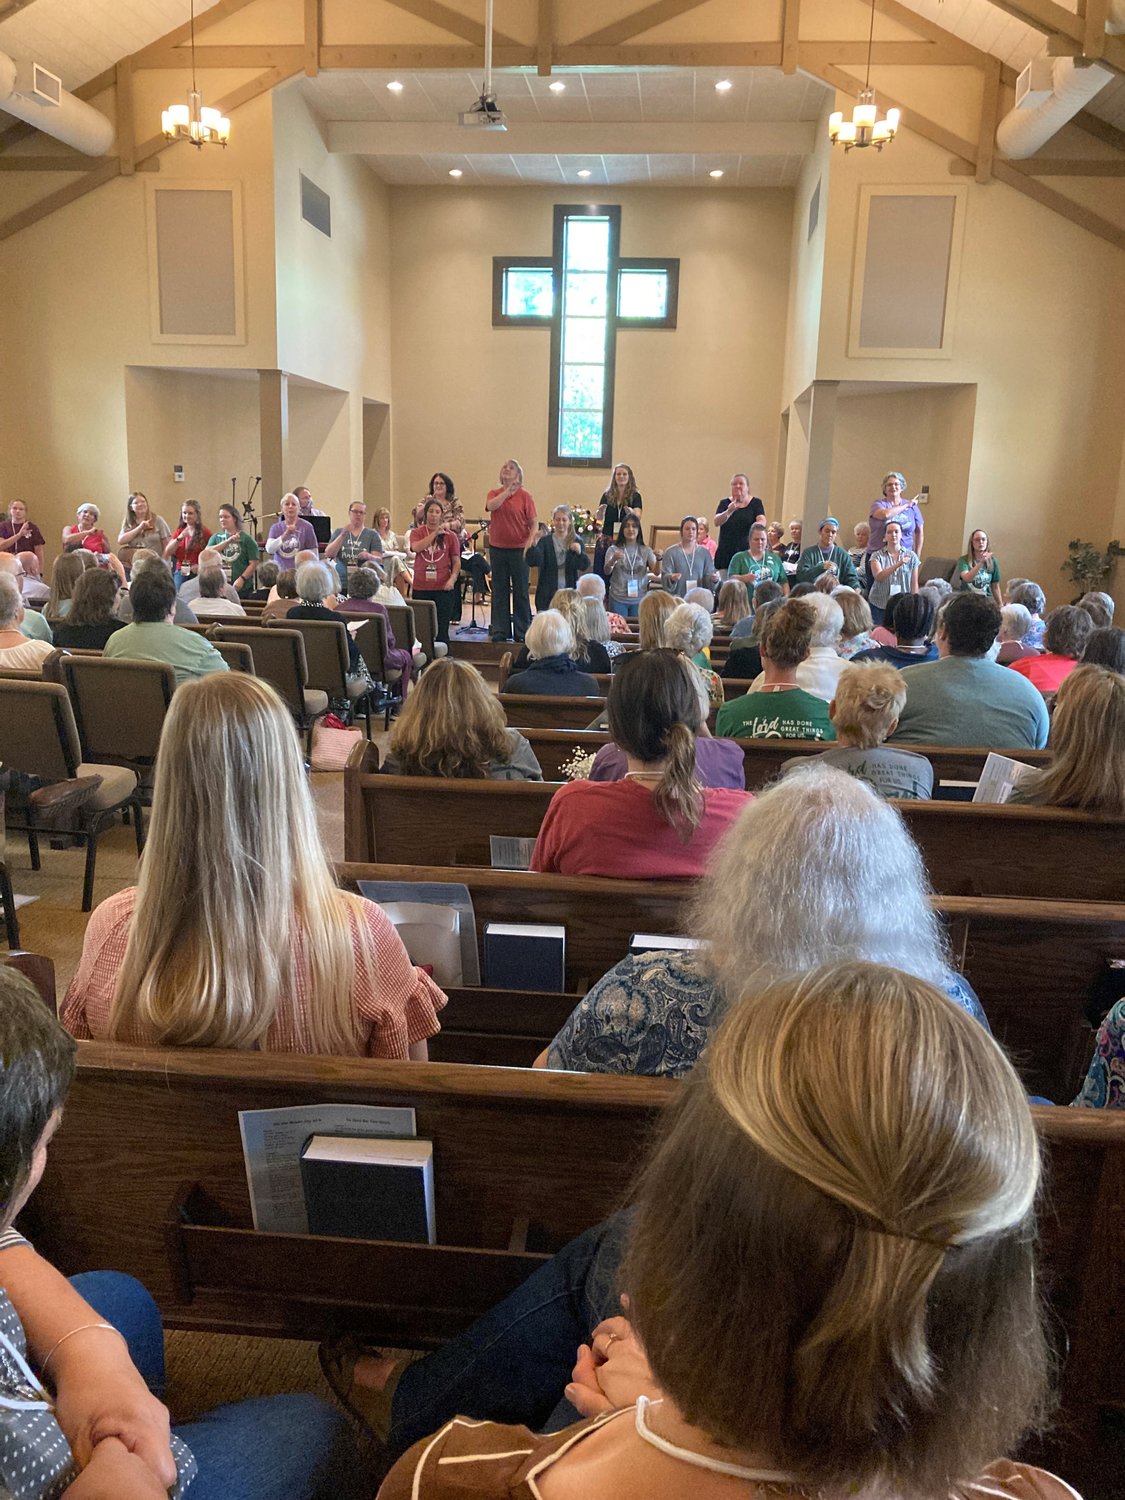 People worship in the chapel at Camp Pinnacle on Saturday, September 17, 2022.